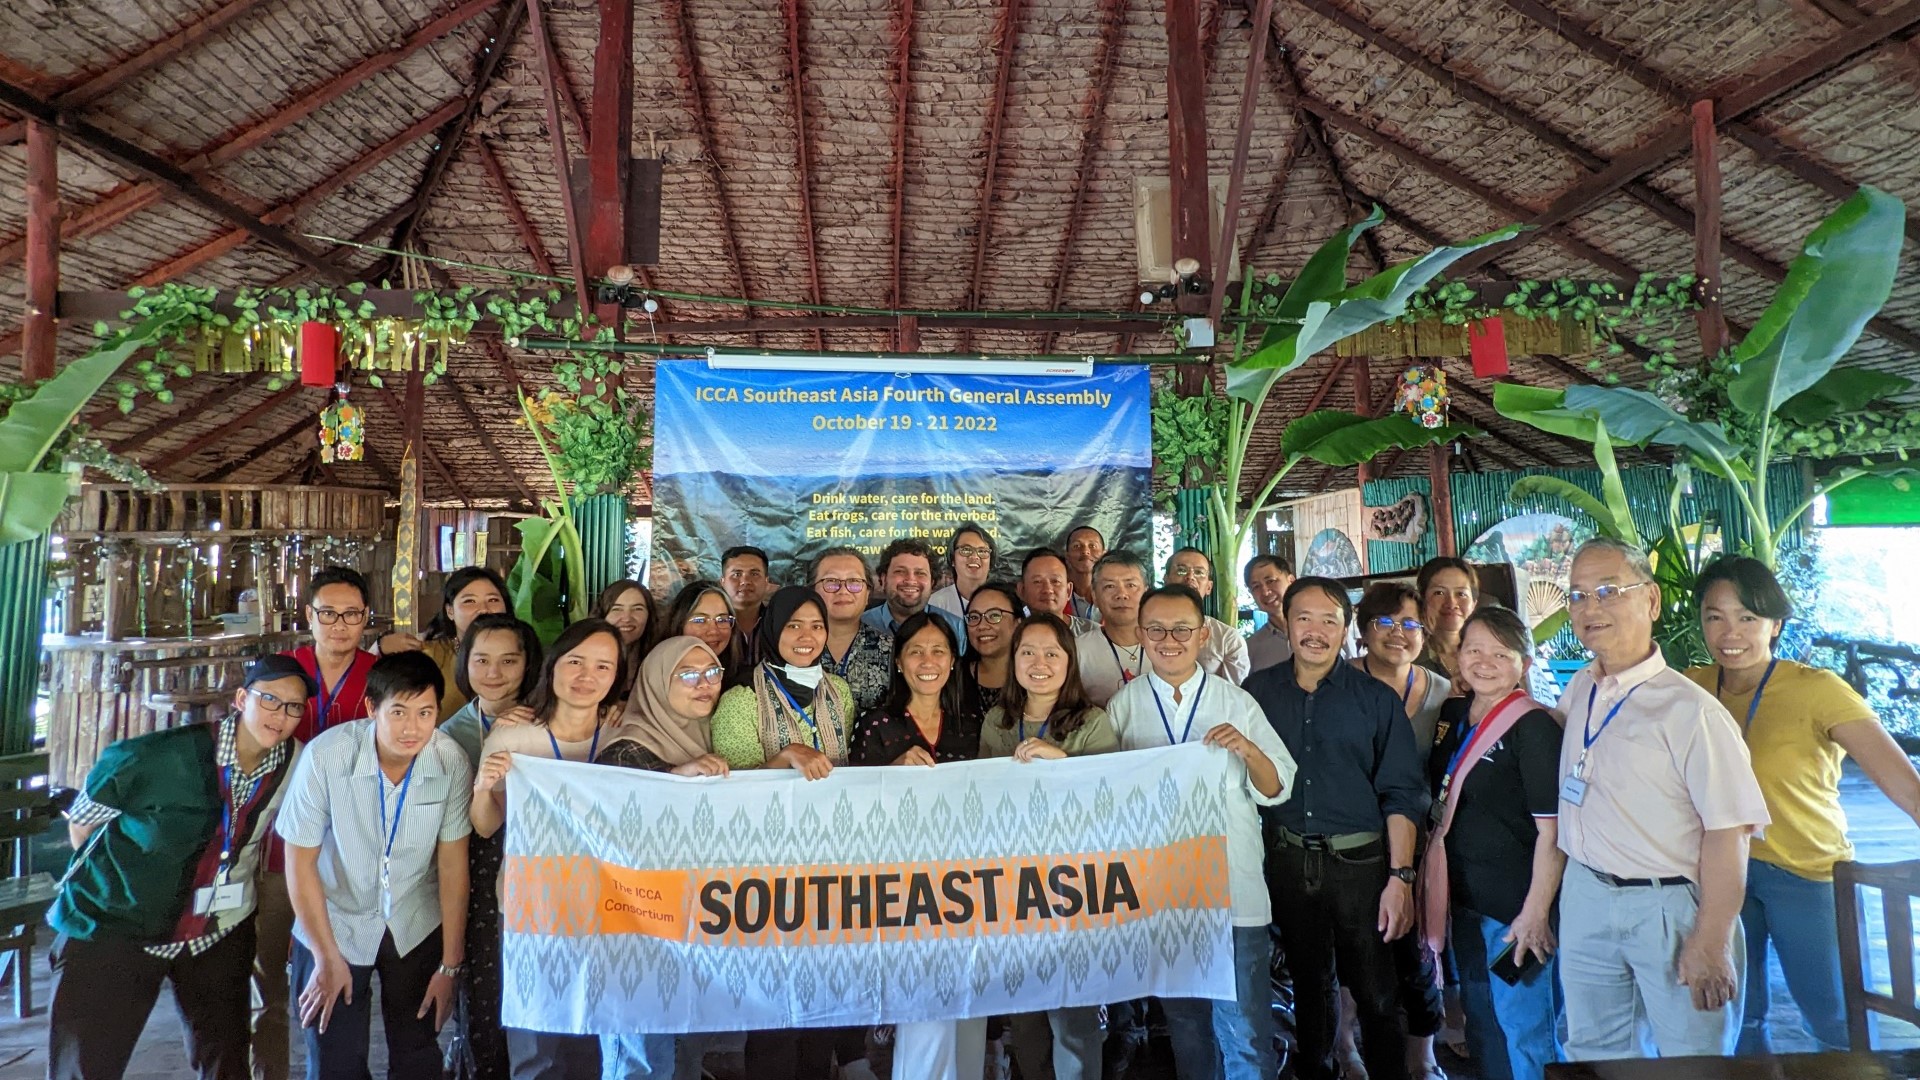 ICCA Consortium Southeast Asia meets in person for the 4th regional assembly